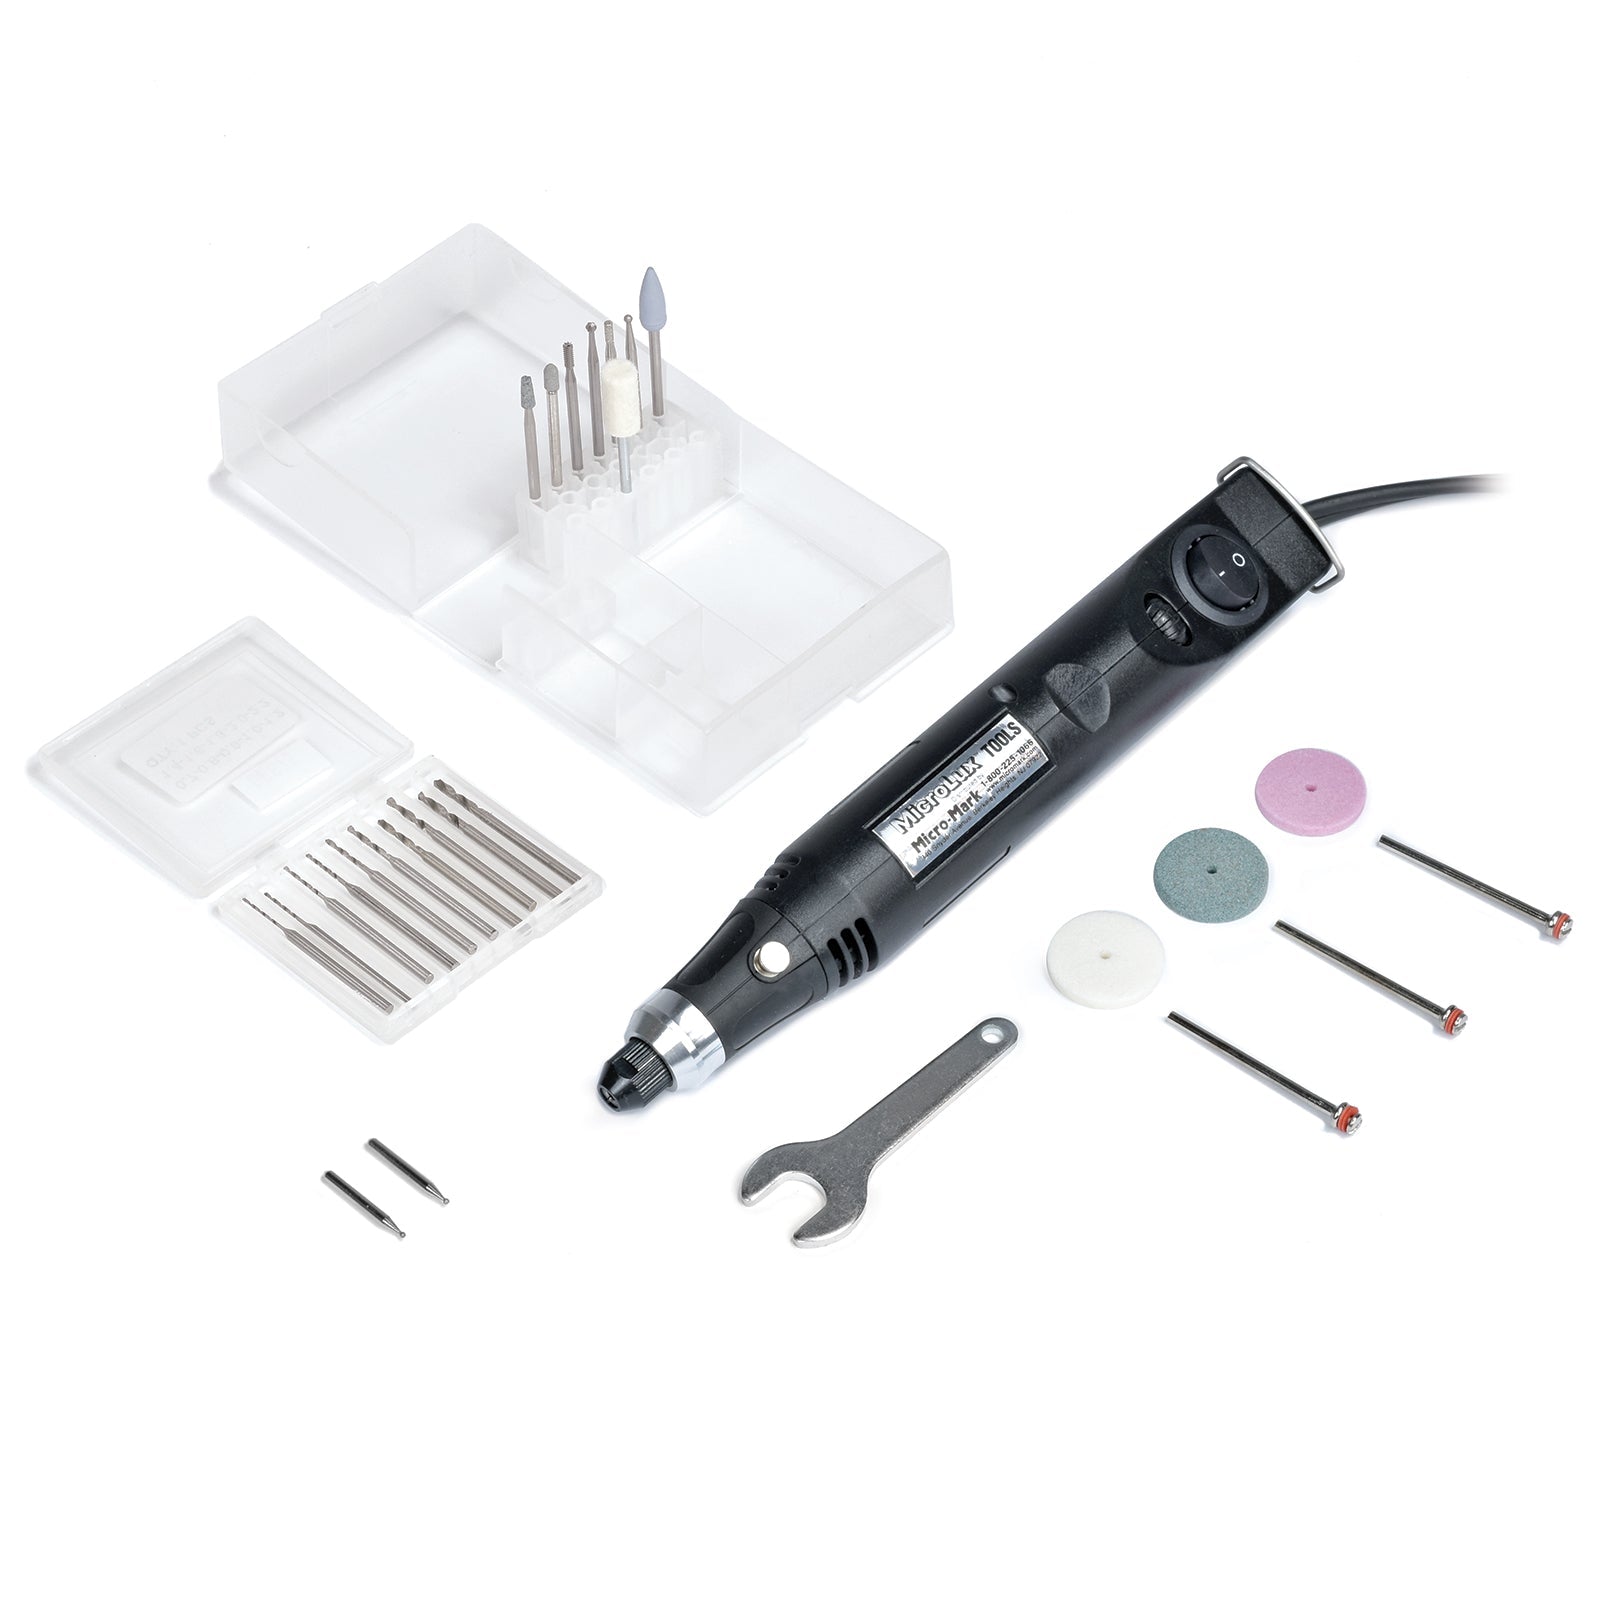 MicroLux® Micro Rotary Tool Super Value Package